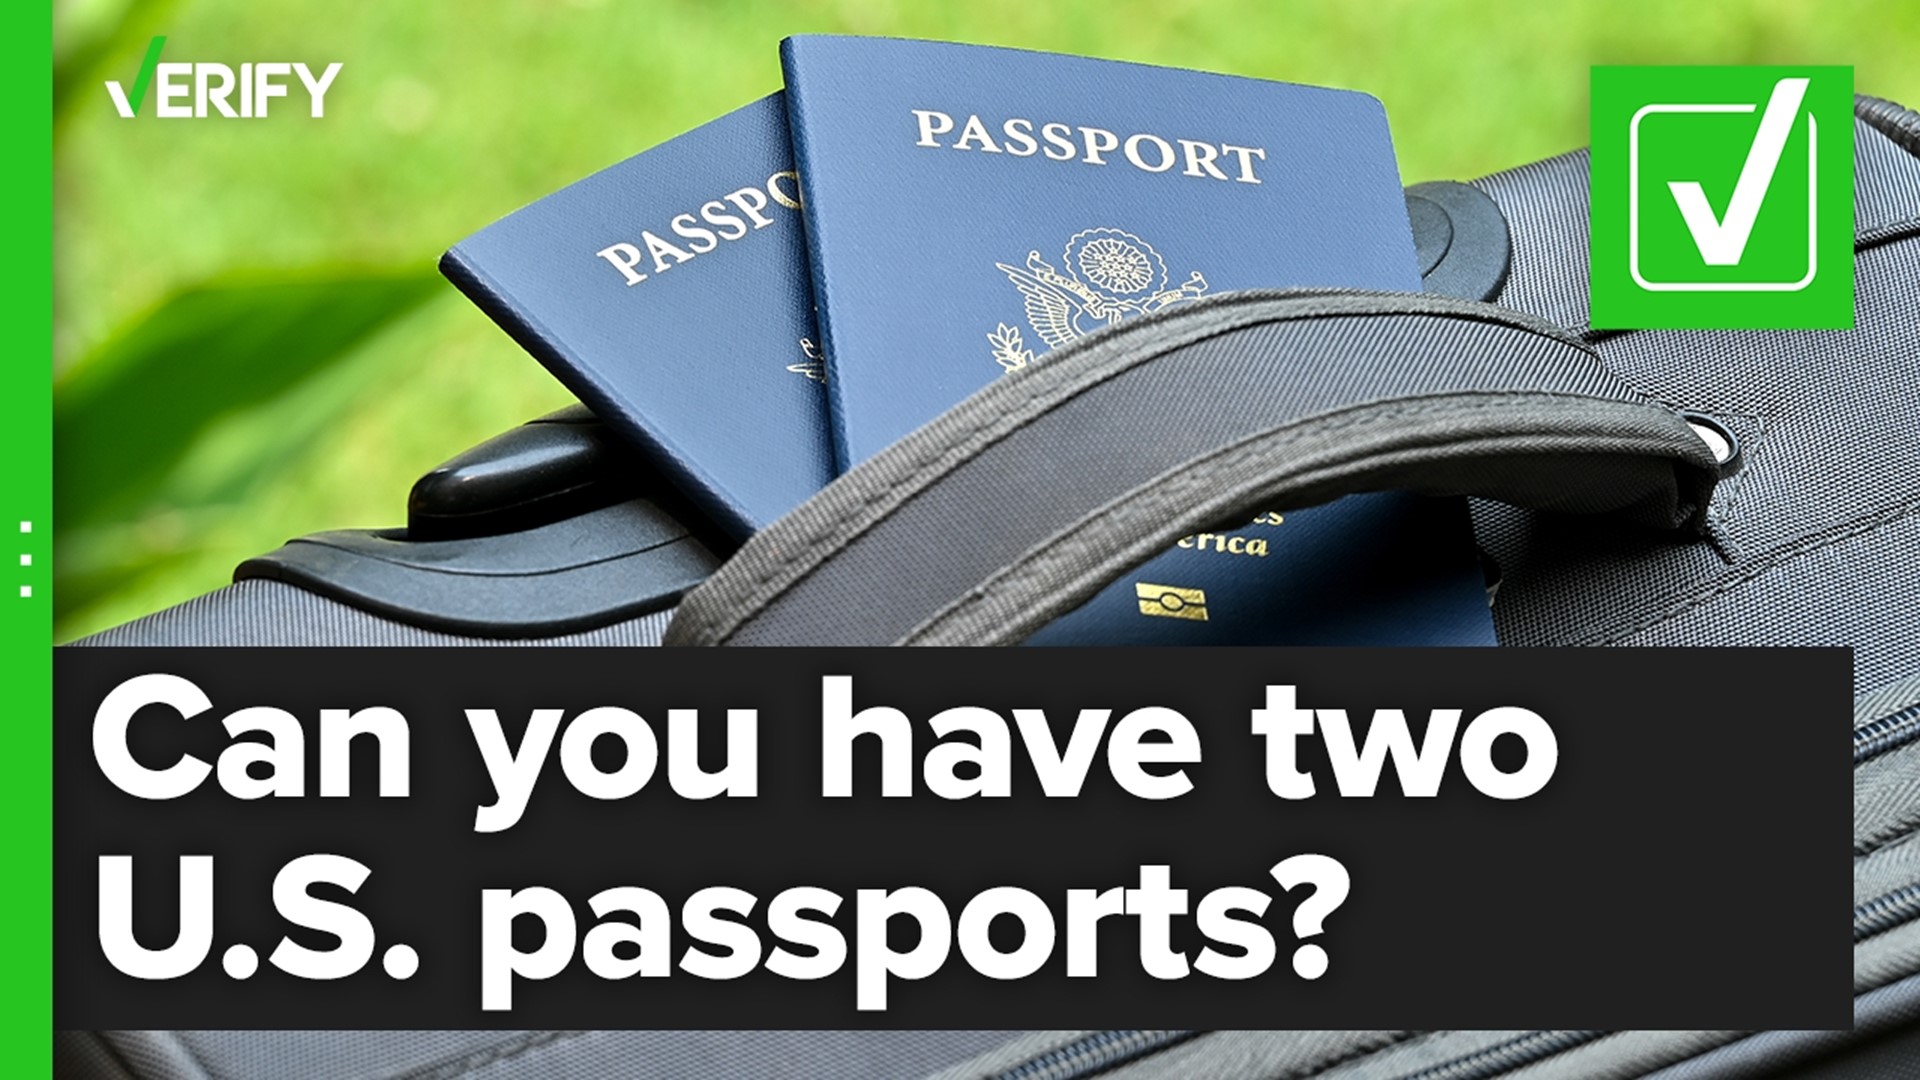 The VERIFY team confirms yes, you have more than one valid U.S. passport.